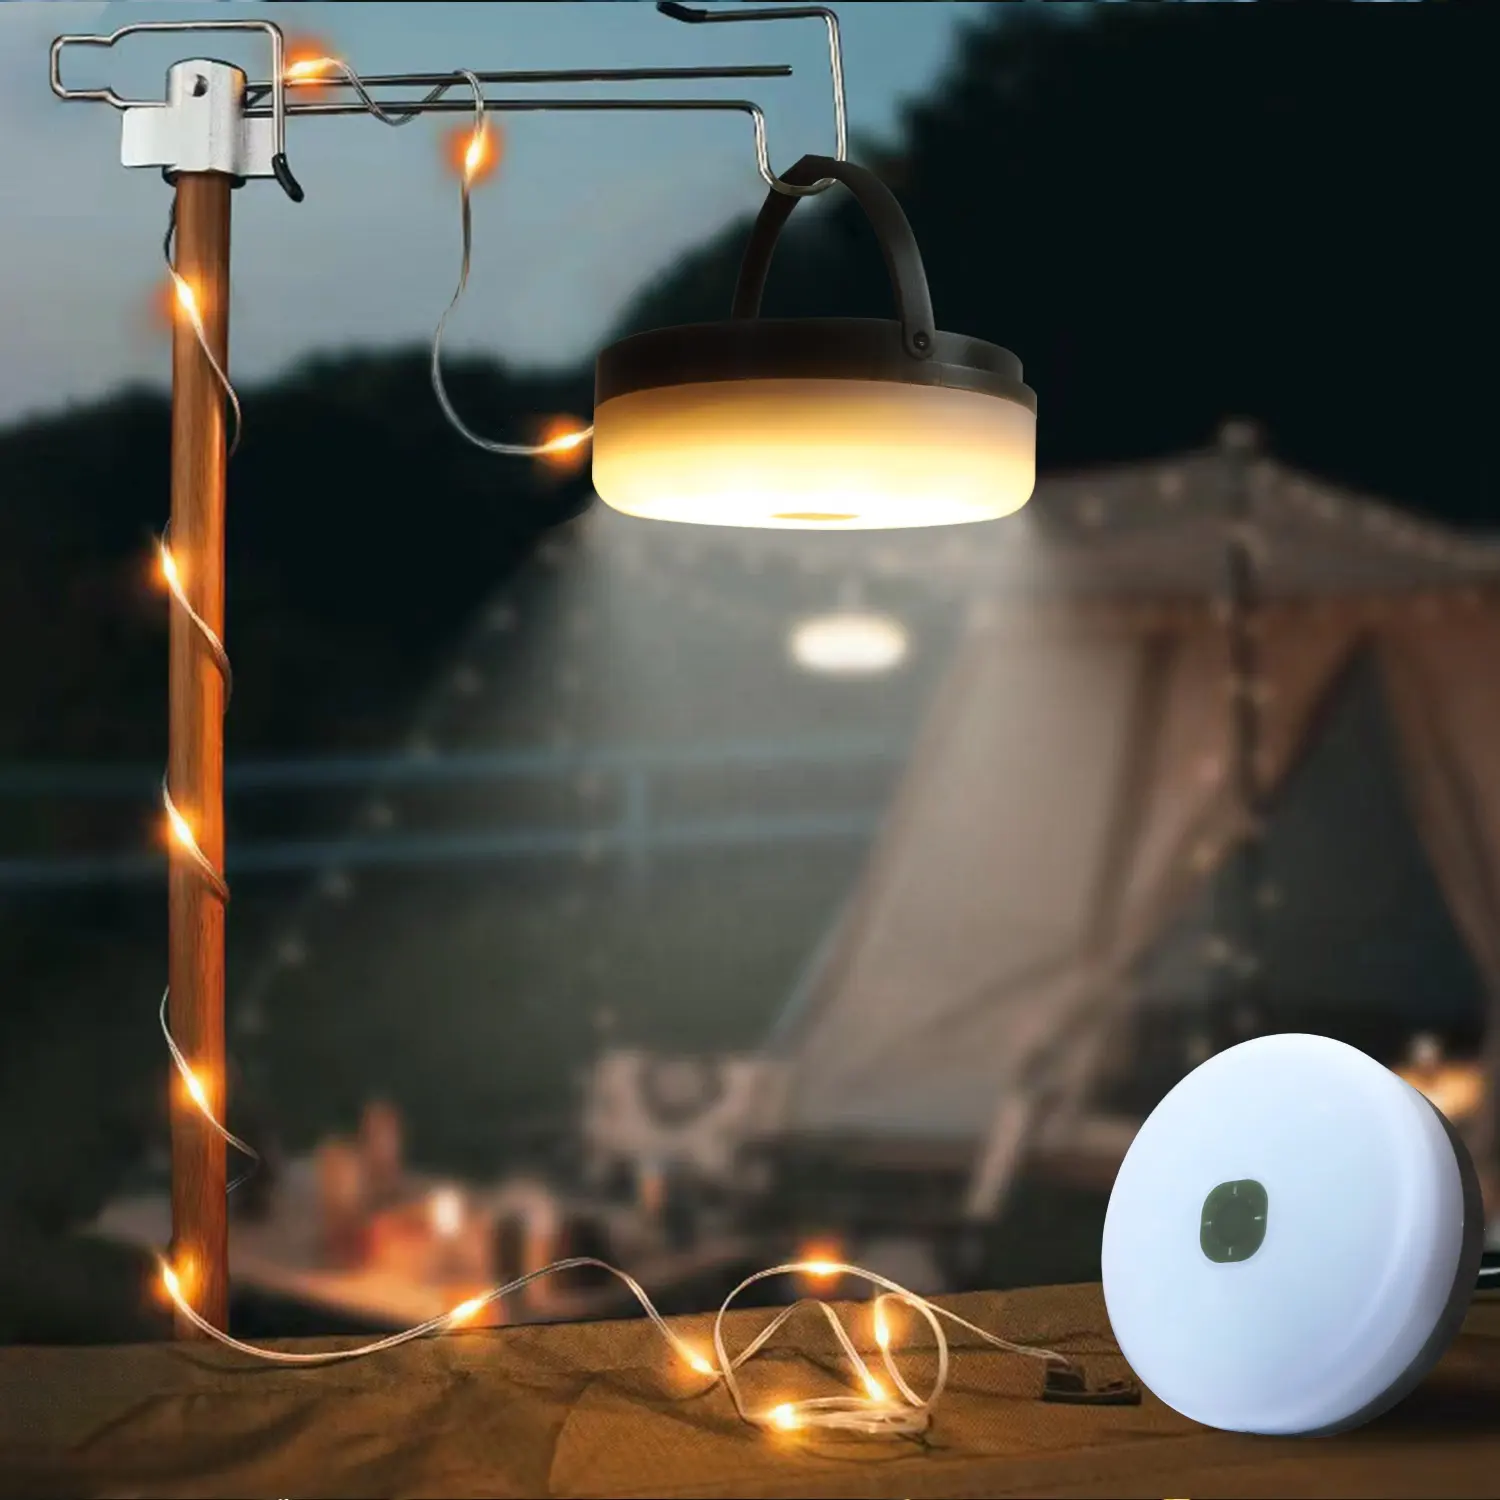 Solar USB Rechargeable Bulb LED Camping String Lights Strip Lantern Lamp Hanging Hook Portable Tent Lamp Waterproof Warm white